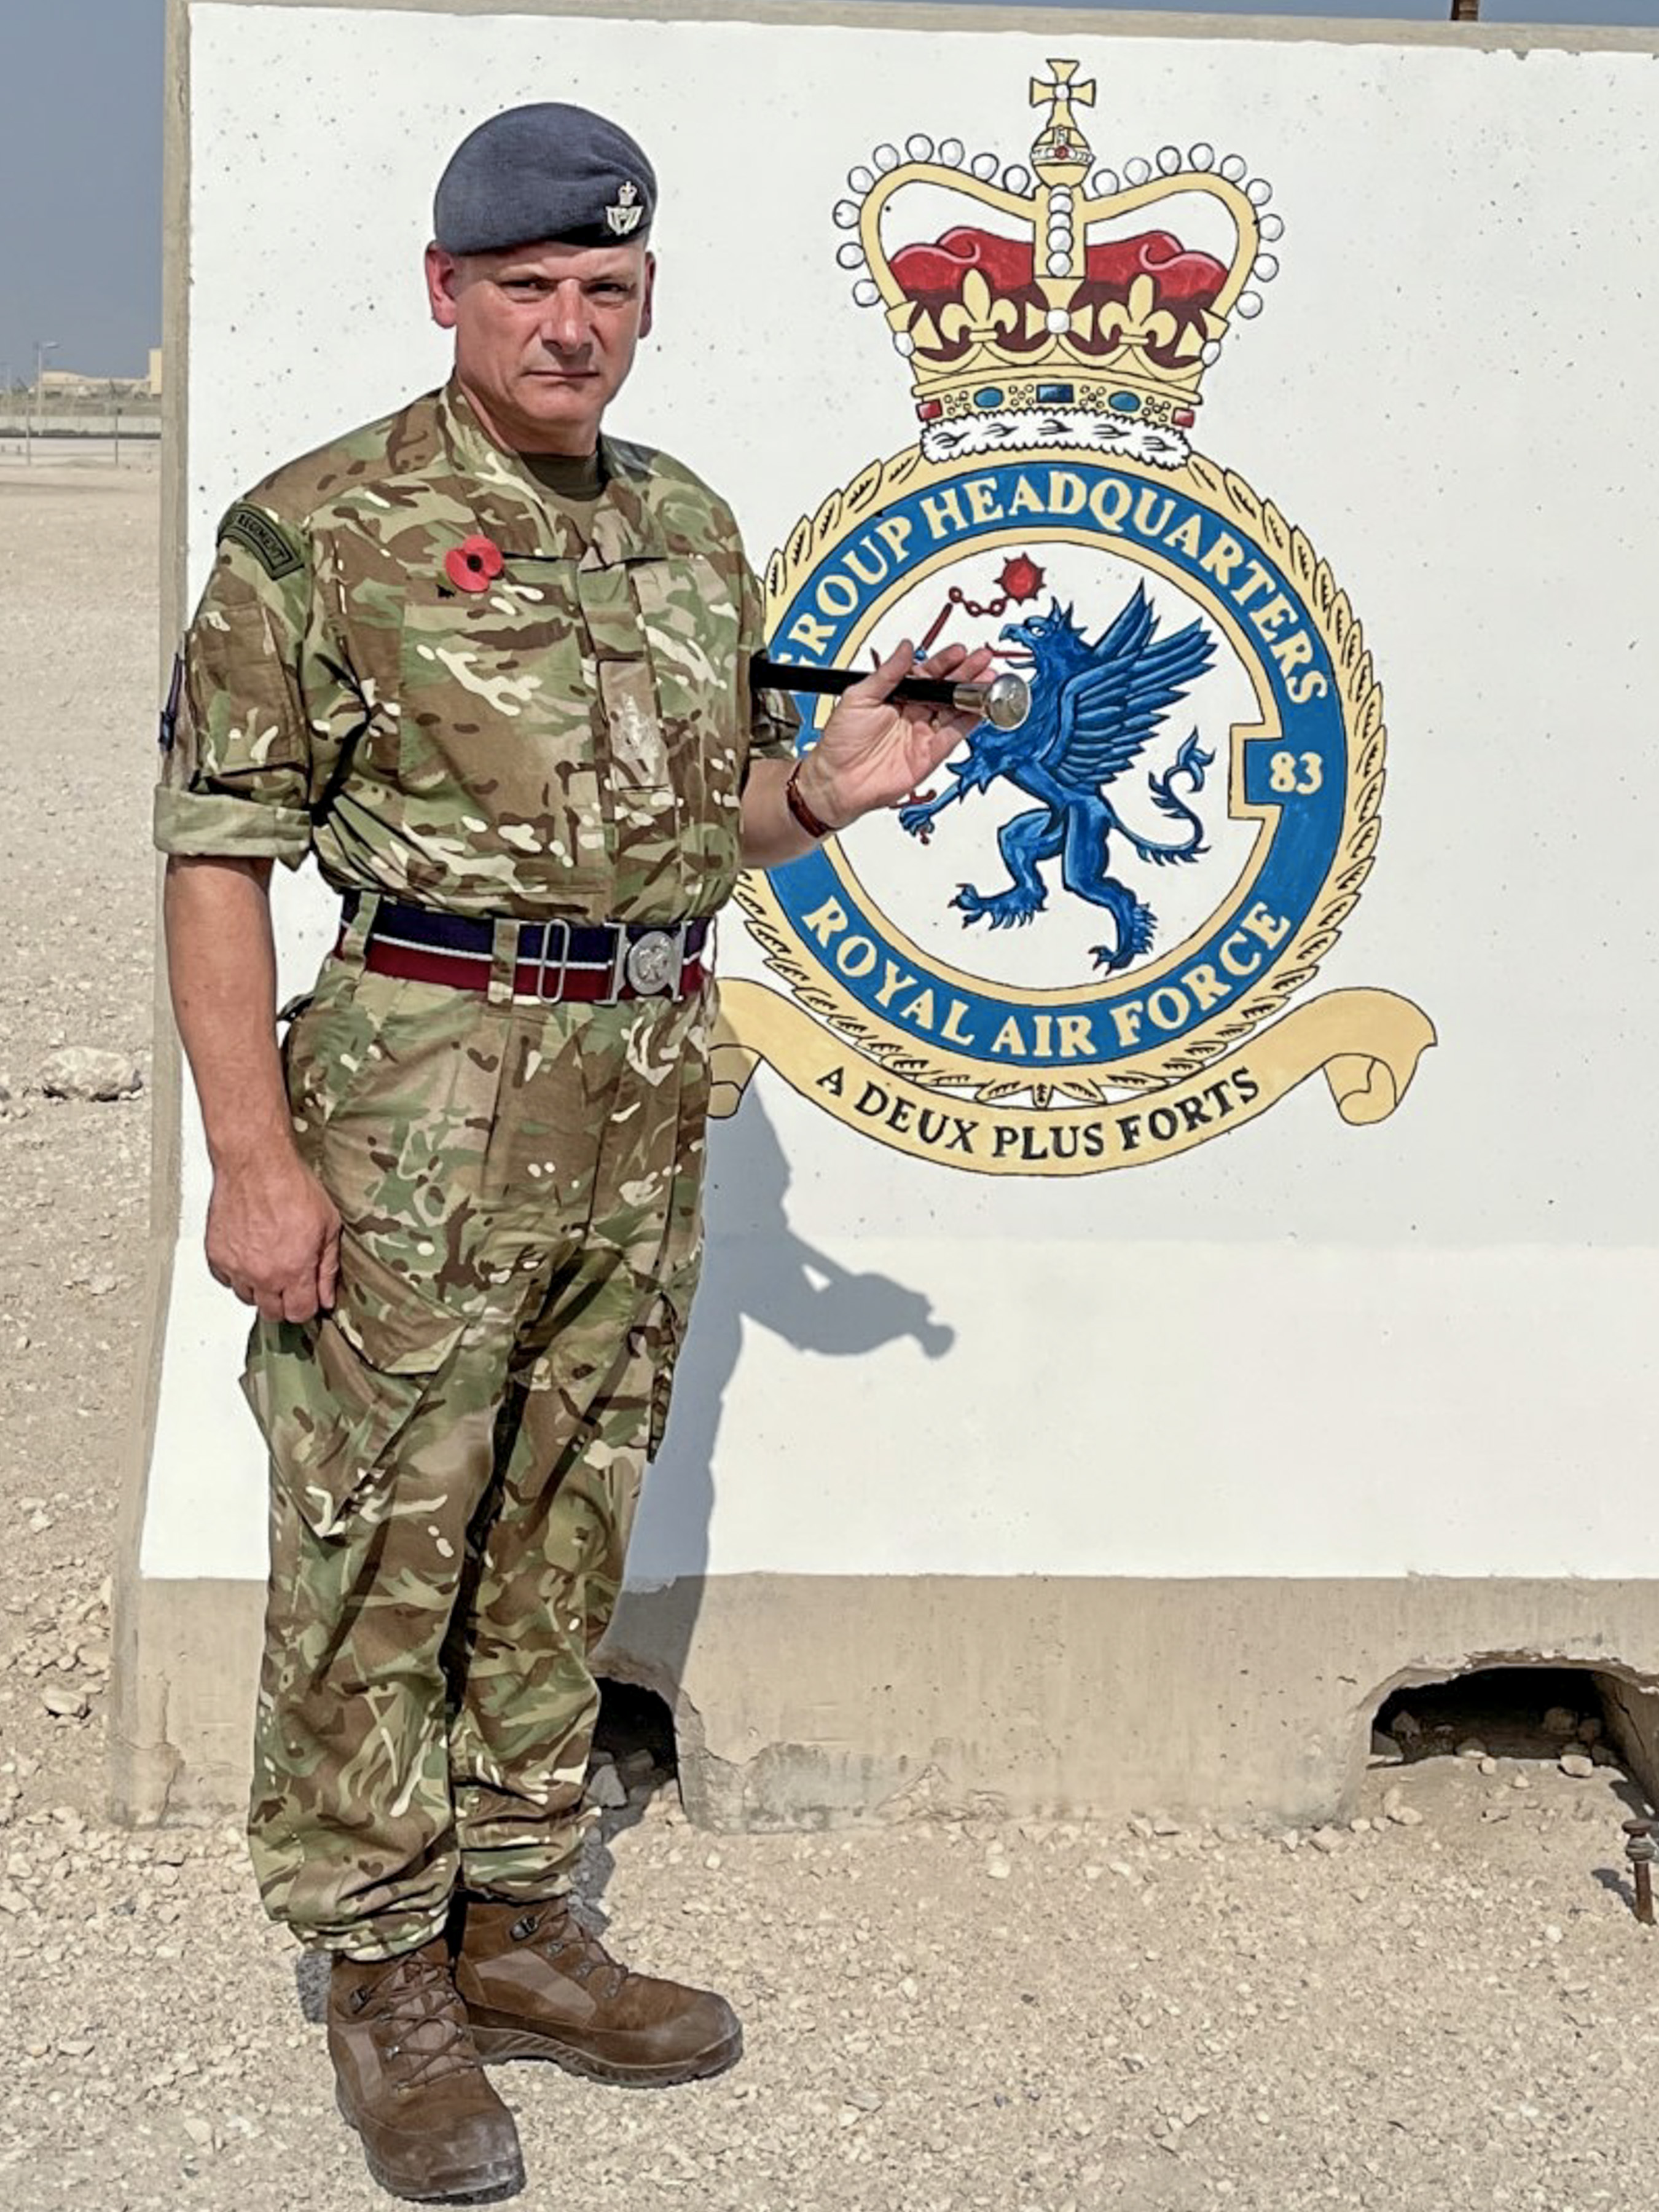 Image shows RAF personnel standing next to Squadron crest on a statue in Iraq. 